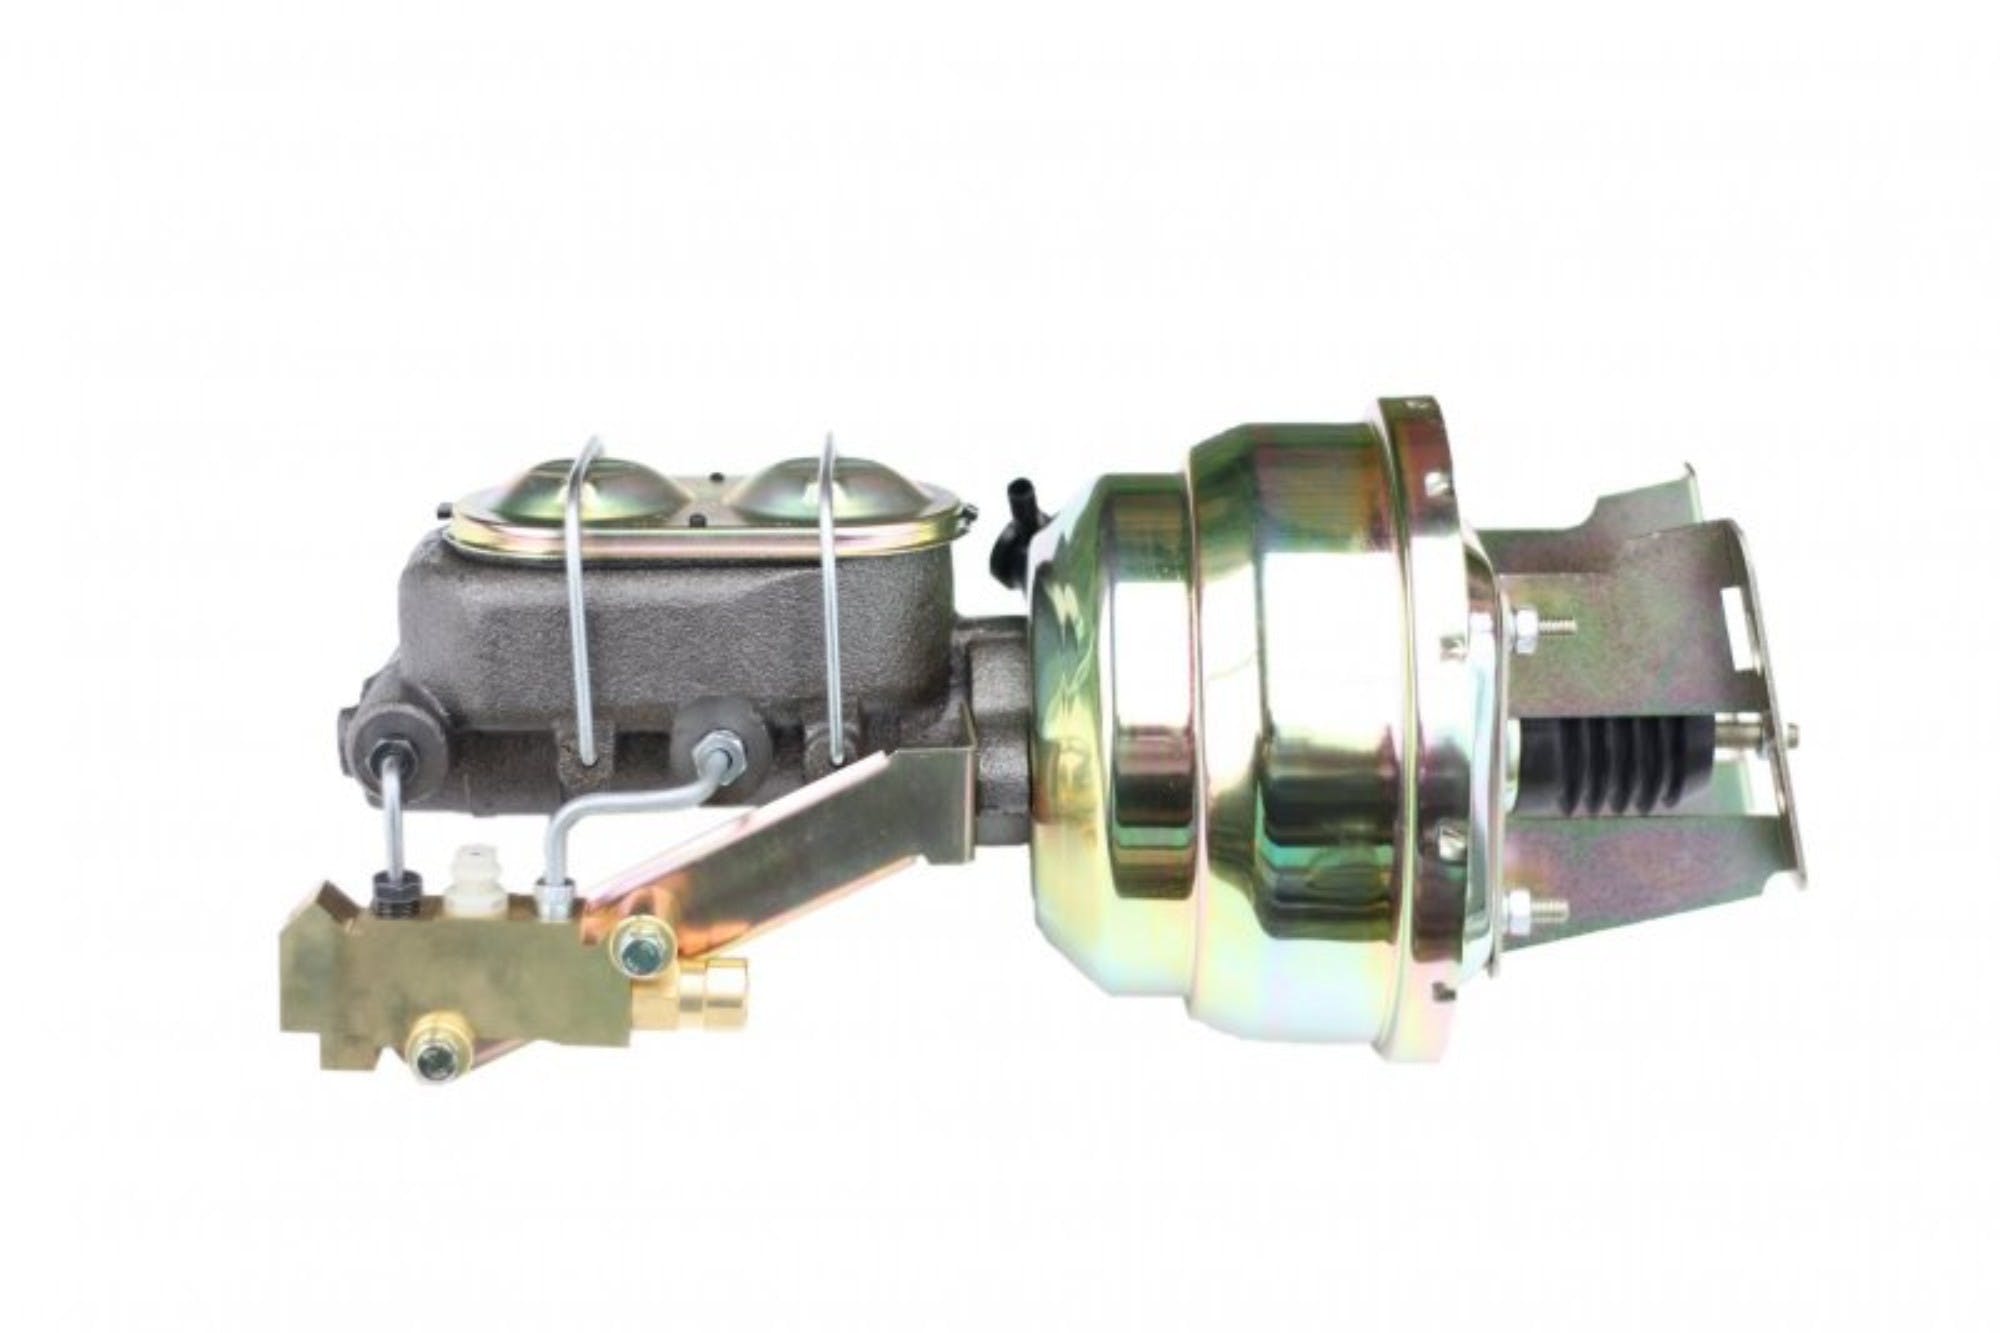 LEED Brakes 3U1A3 8 in Dual Power Booster ,1-1/8in Bore, side valve disc/disc (Zinc)